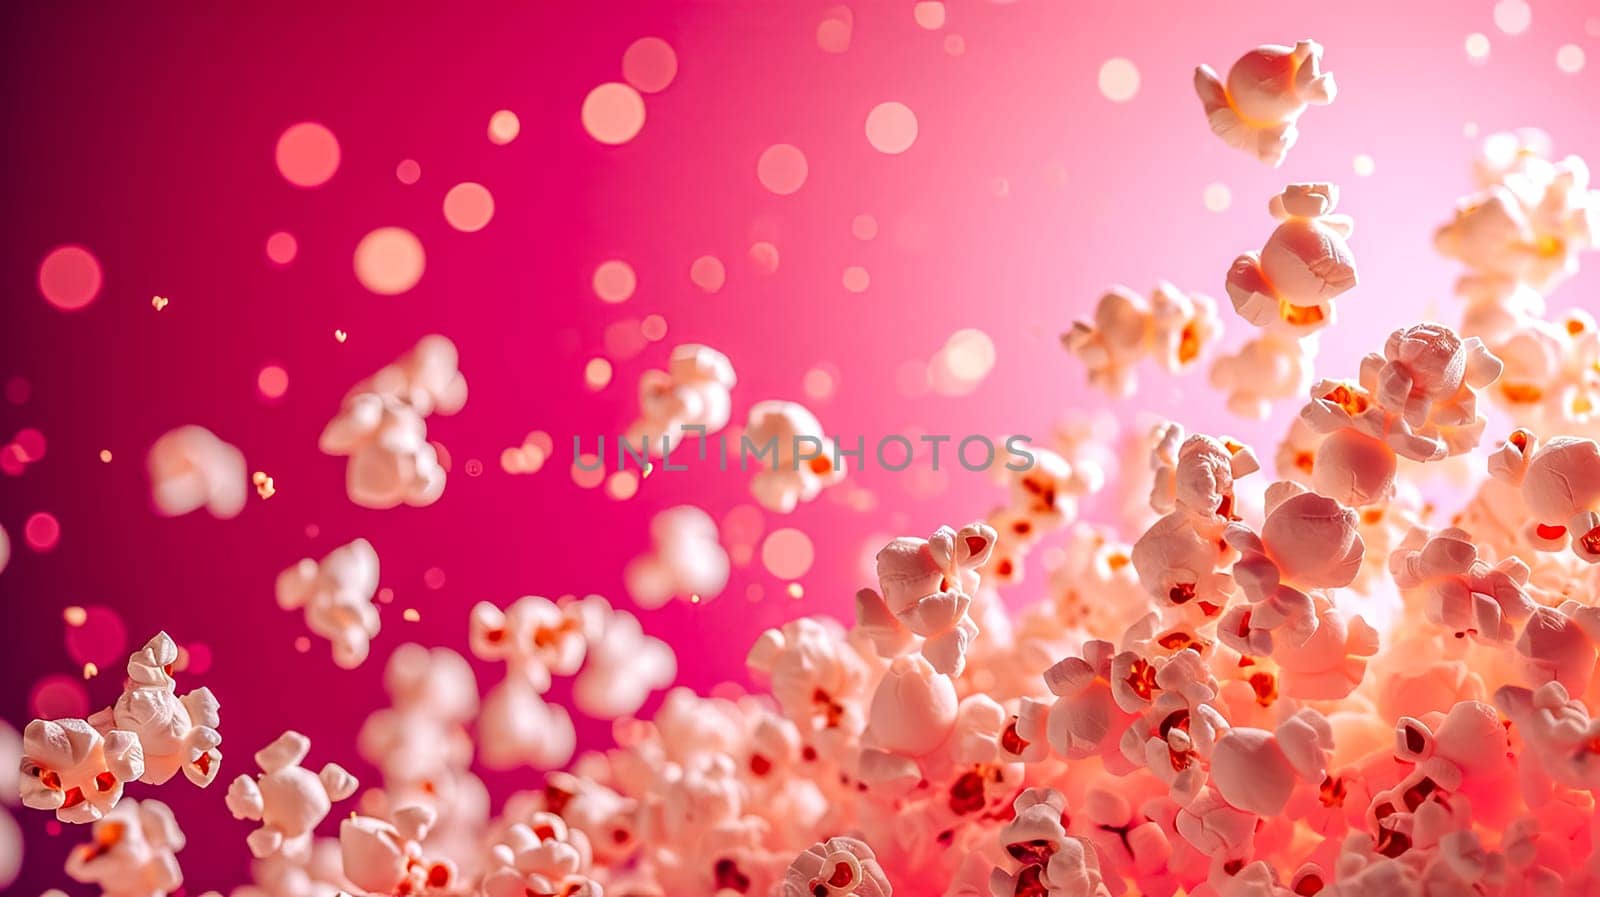 Exploding popcorn against a vibrant pink bokeh background, capturing the dynamic motion and festive vibe by Edophoto